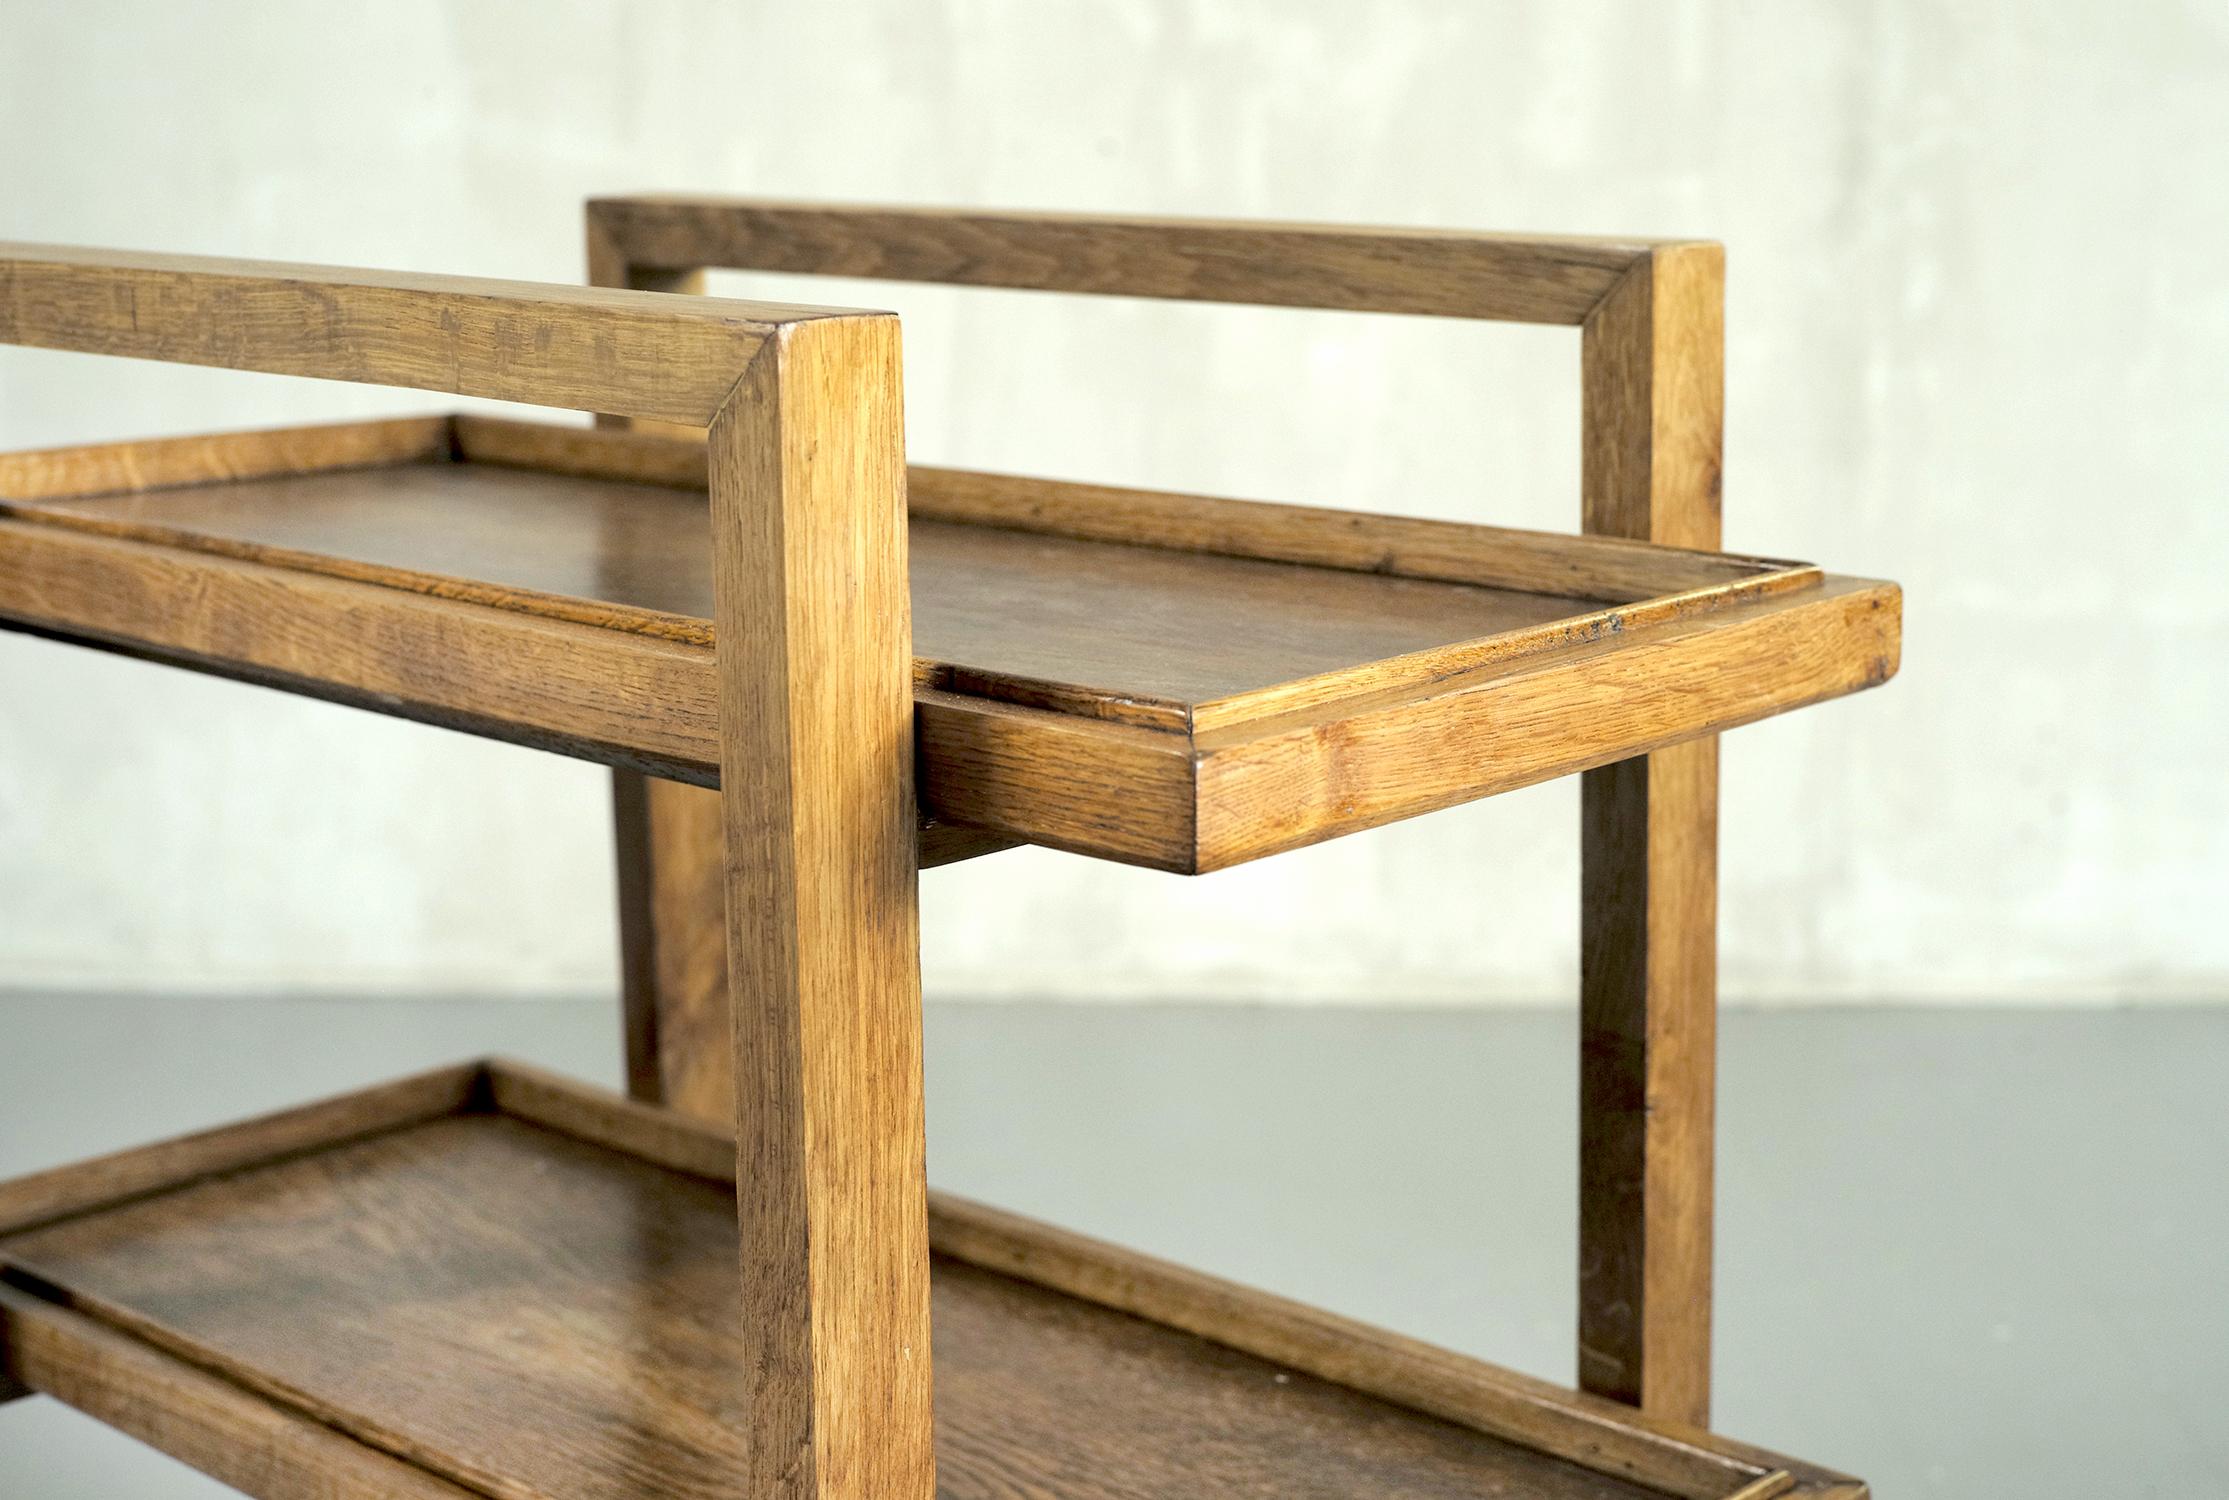 Trolley with two removable trays RG 15 in blond oak by René Gabriel, France 1946. Designed in 1937, this trolley is a masterpiece of sobriety and rationalism. The two arches are connected by spacers forming the support of the two trays. Four large